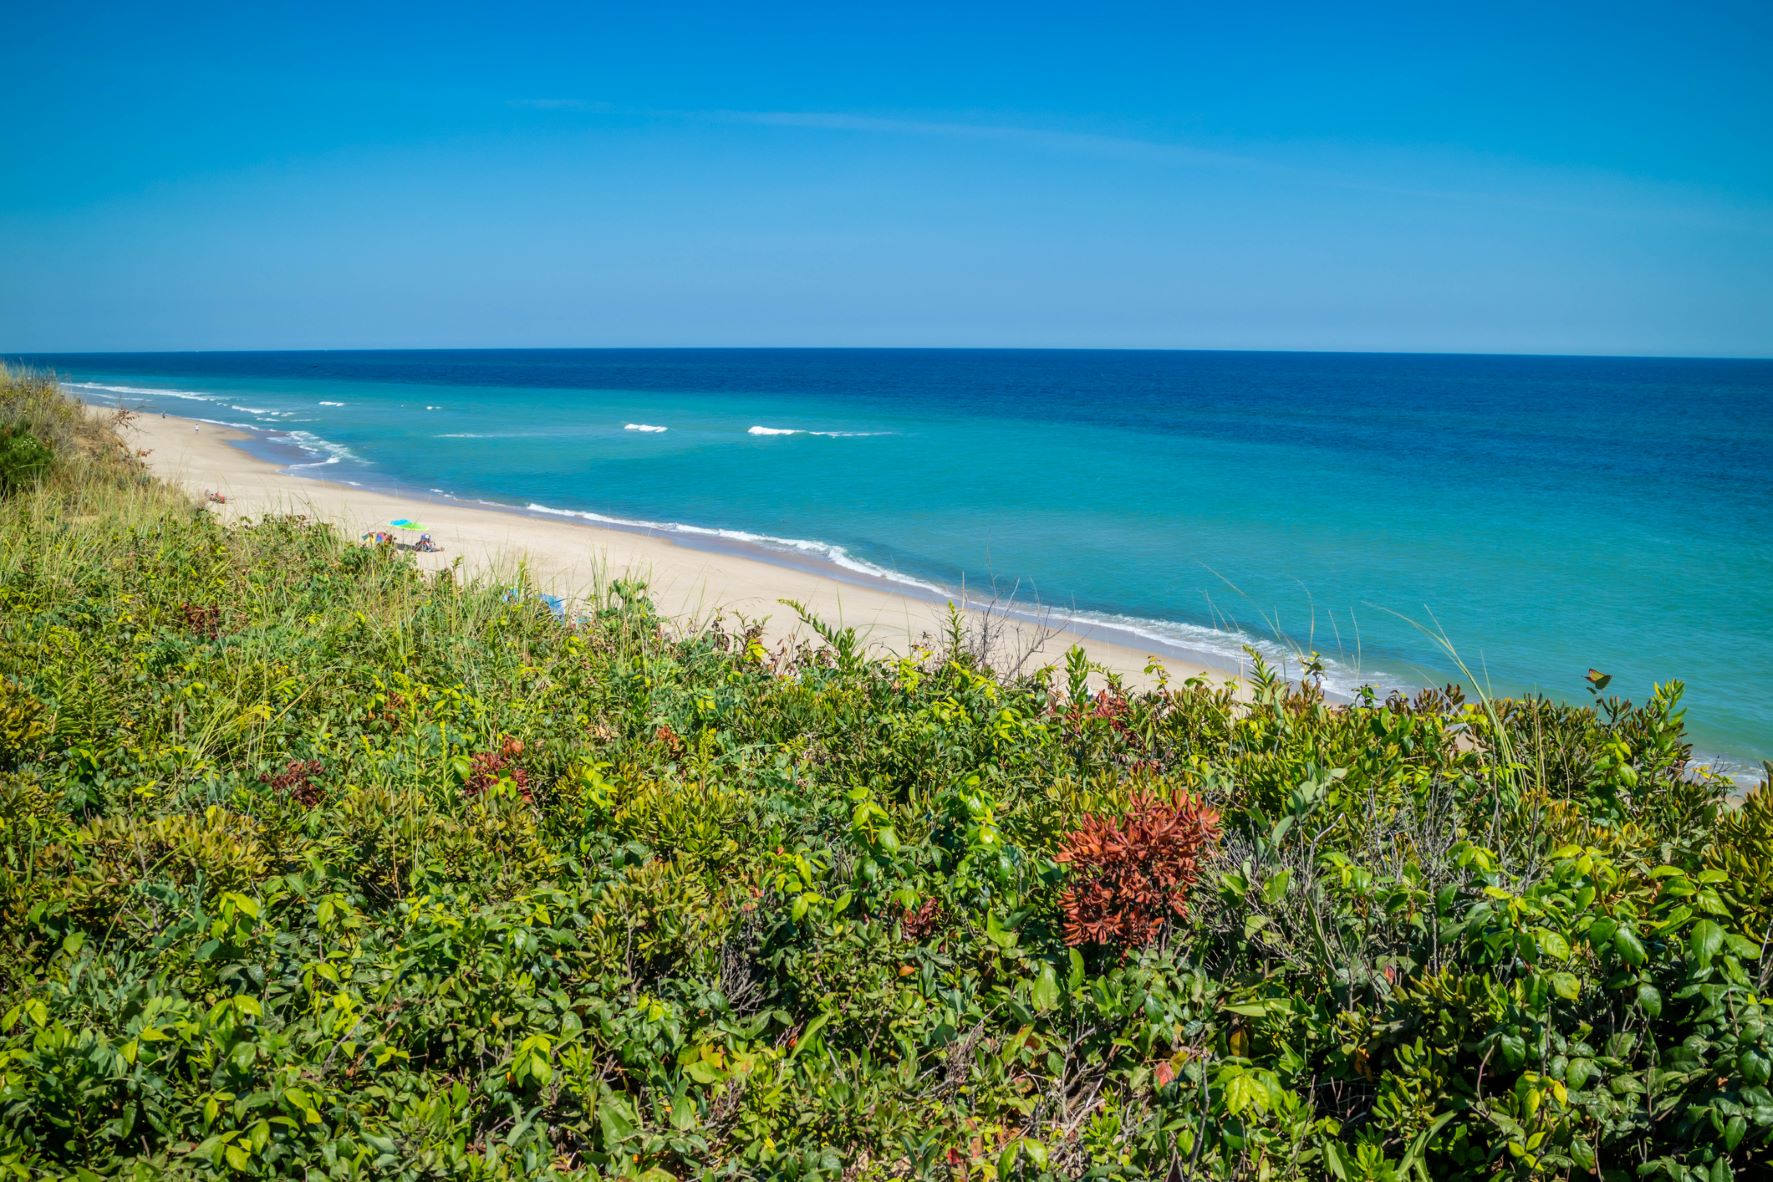 When is the Best Time to Visit Cape Cod?